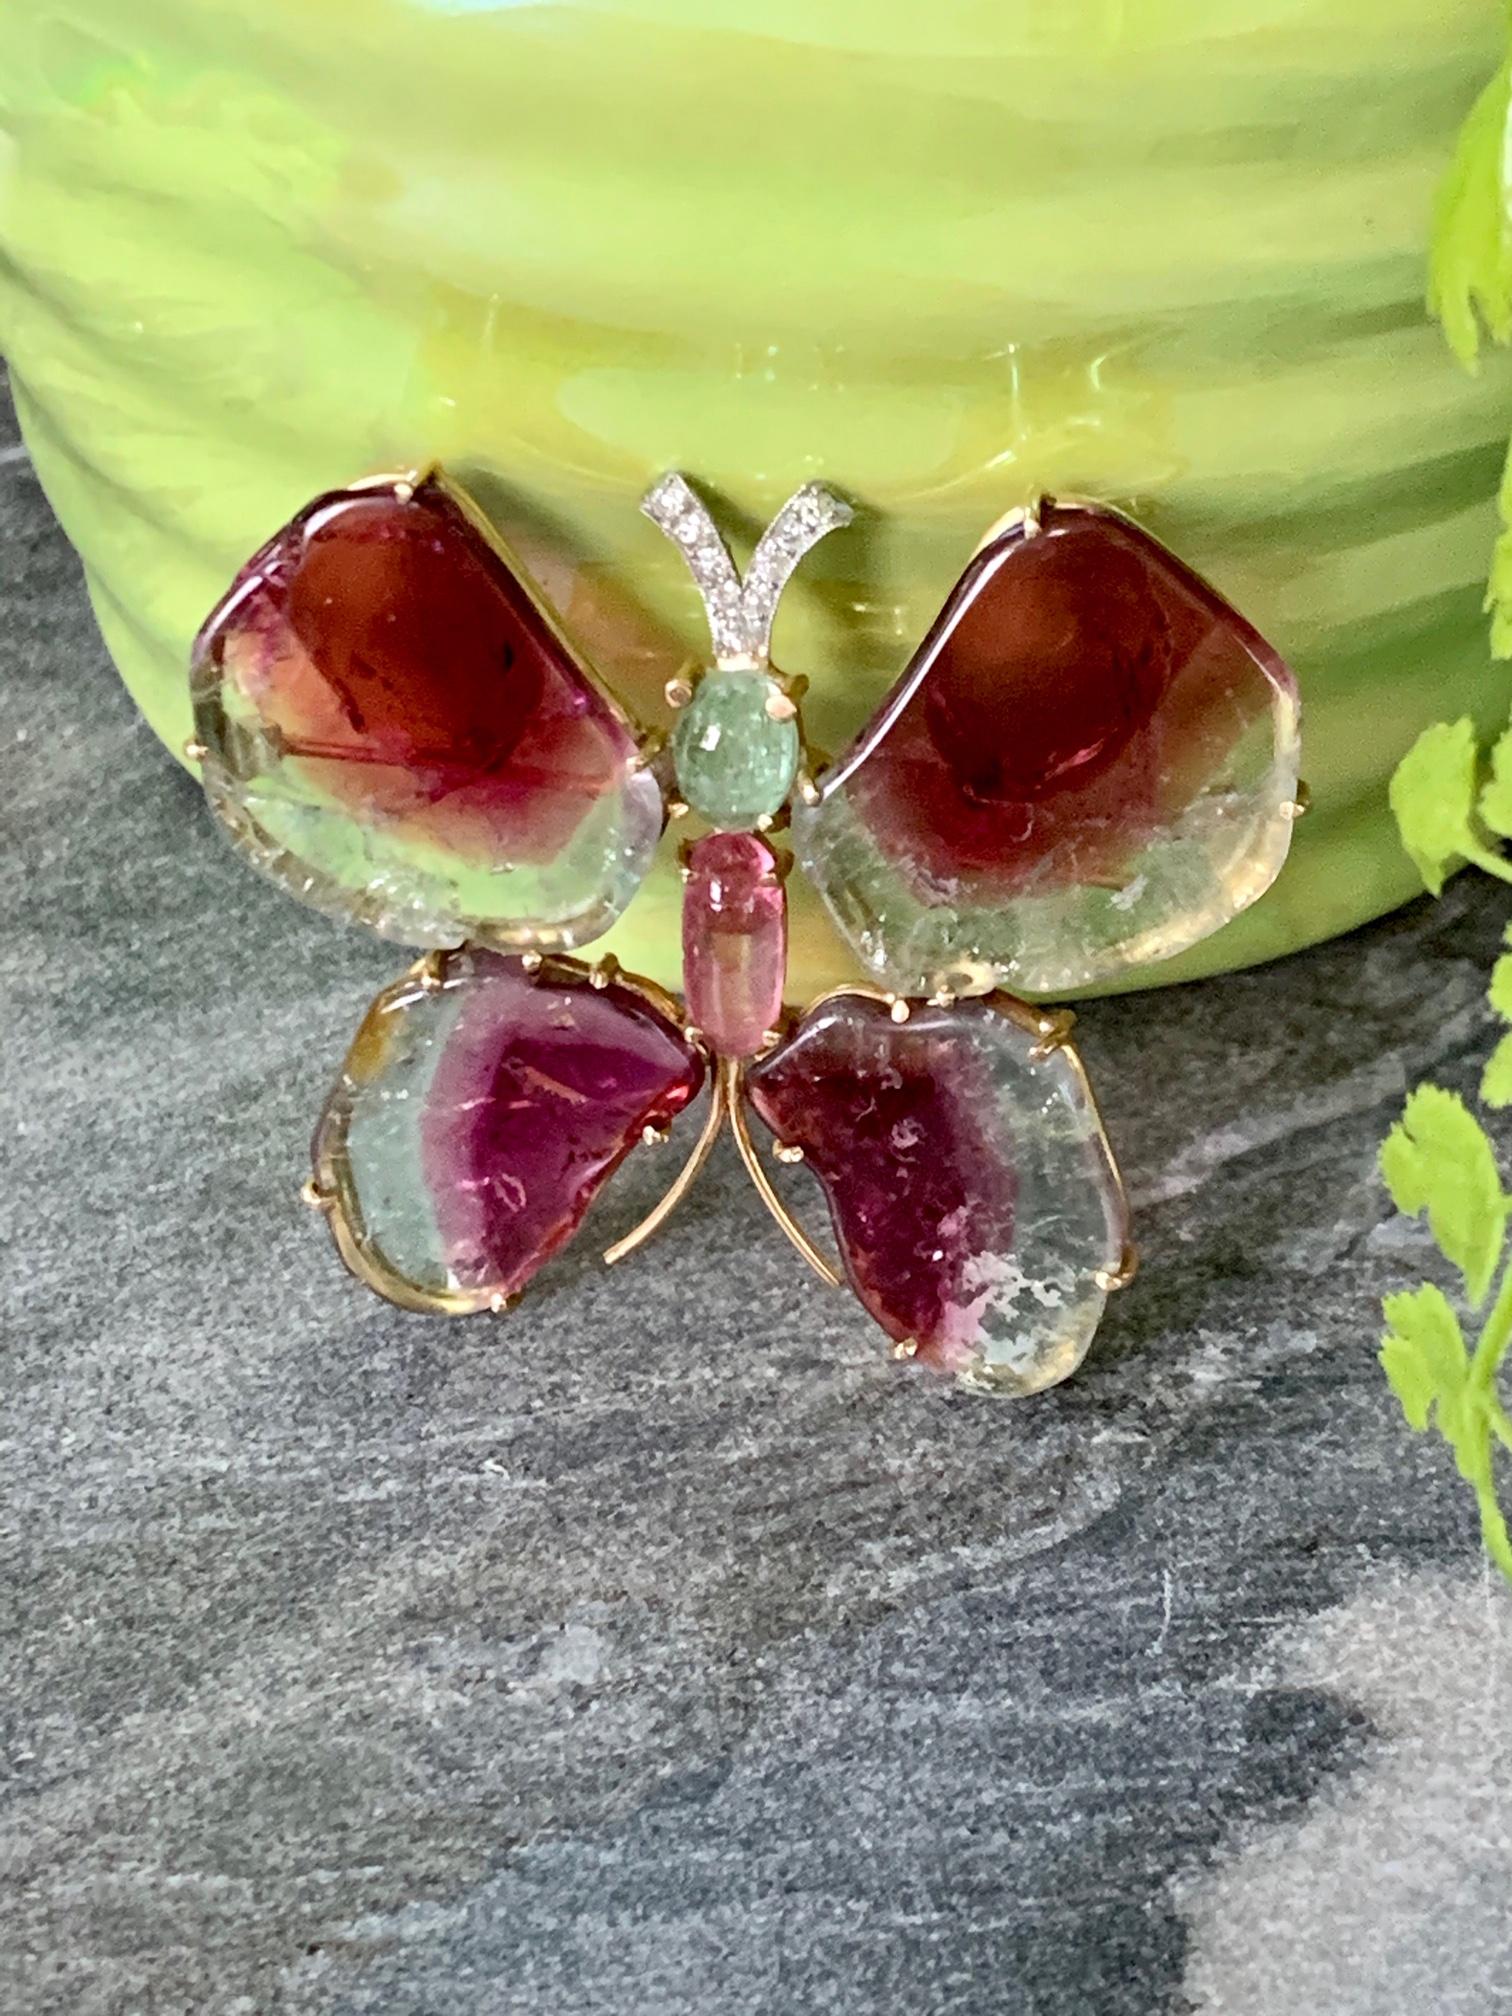 This beautiful butterfly brooch was made circa 1940's-1950's.  It consists of:
4 Watermelon Slice Wings
1 small Green Tourmaline cabochon
1 small oval Pink Tourmaline cabochon
9 small European cut diamond Antenna - approximately .25 ctw

it measures